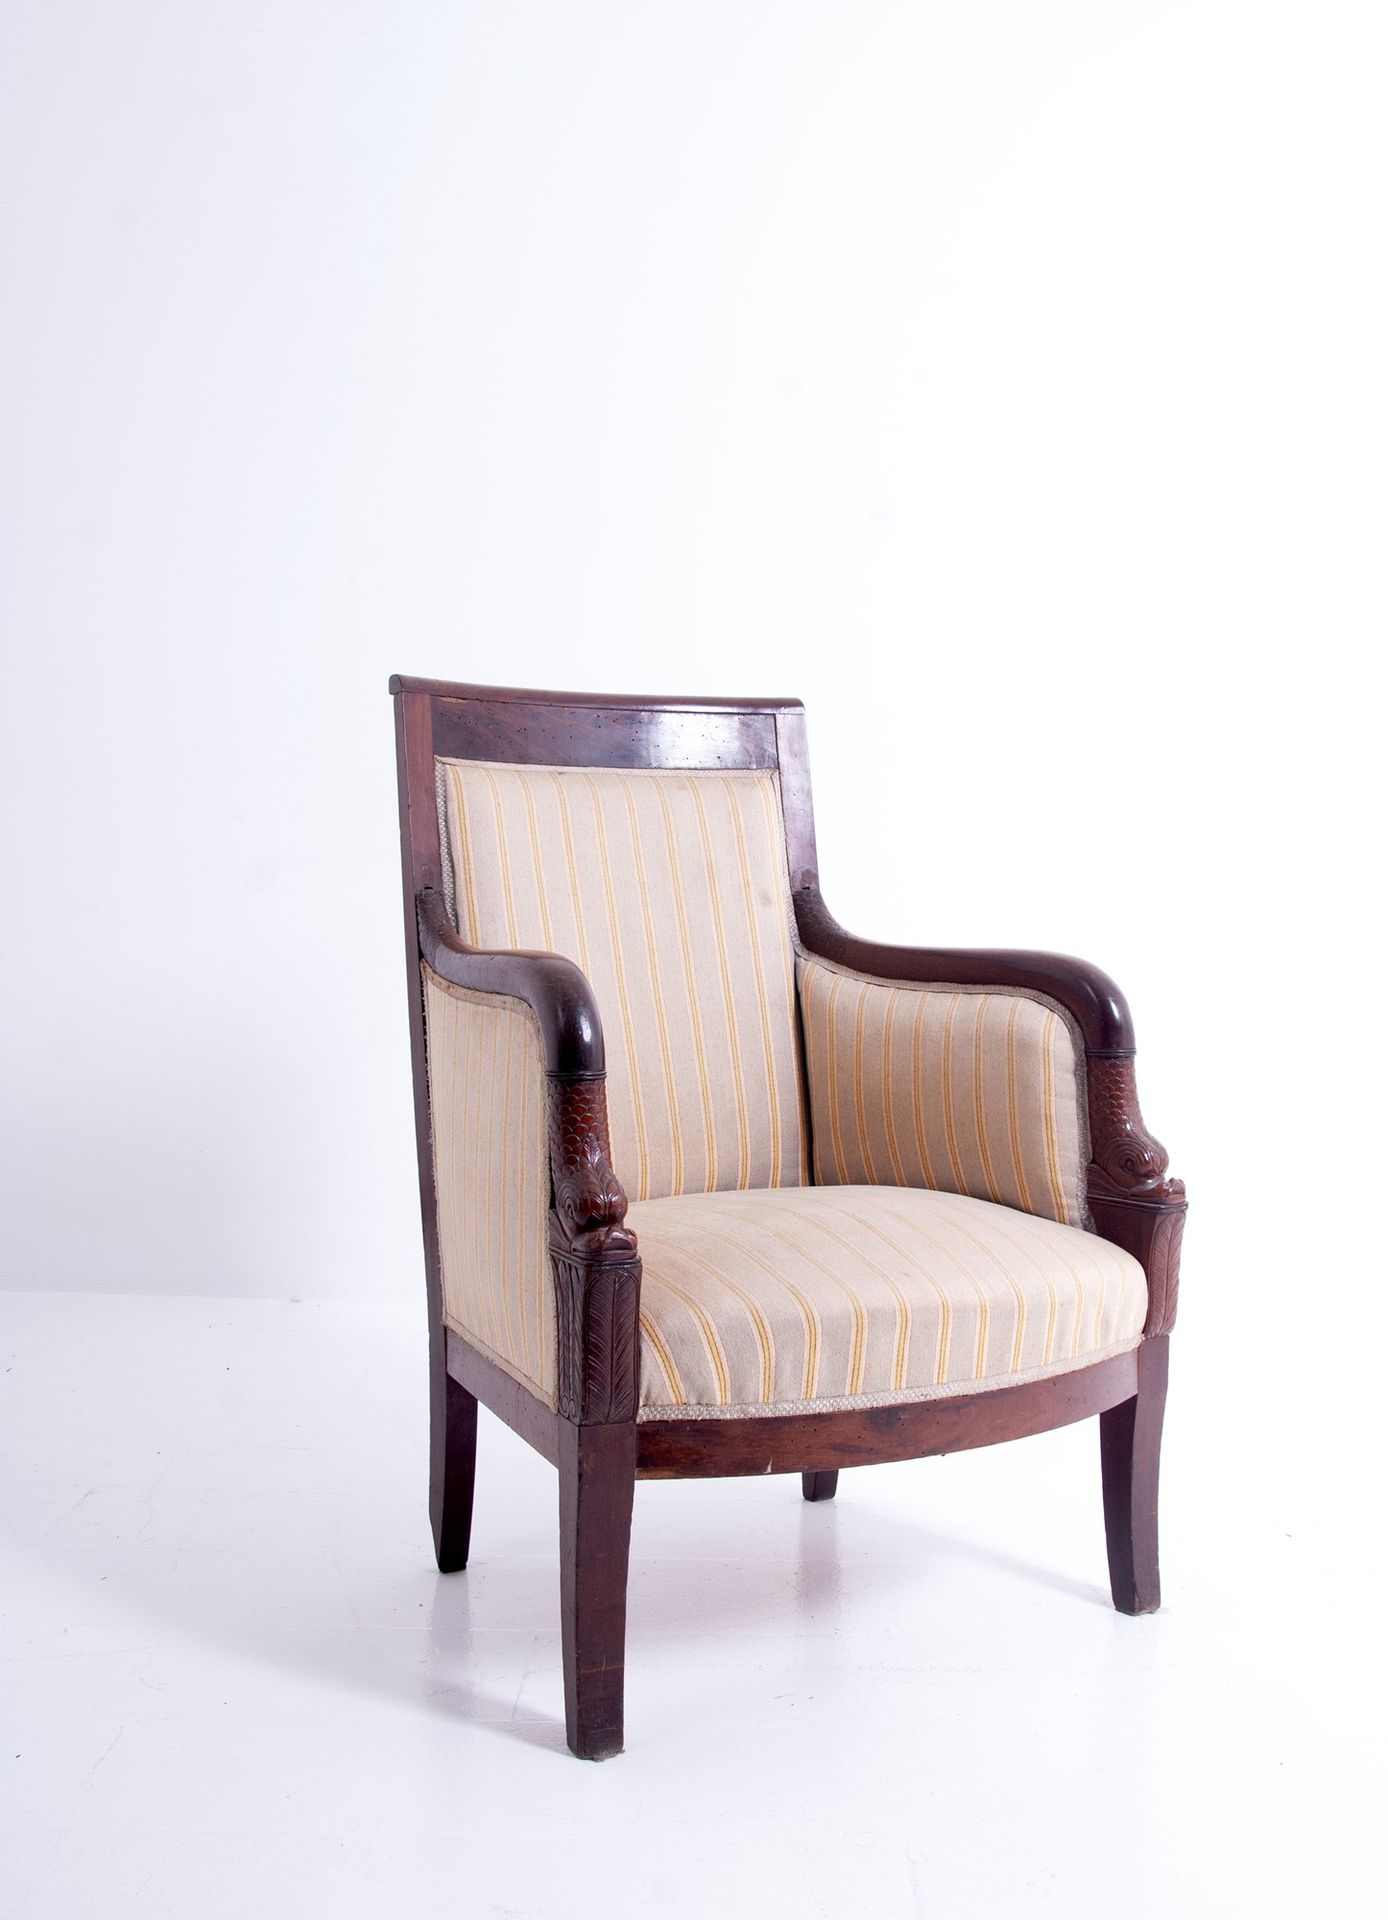 Armchair Walnut armchair with upholstered back and seat. Early 19th century.